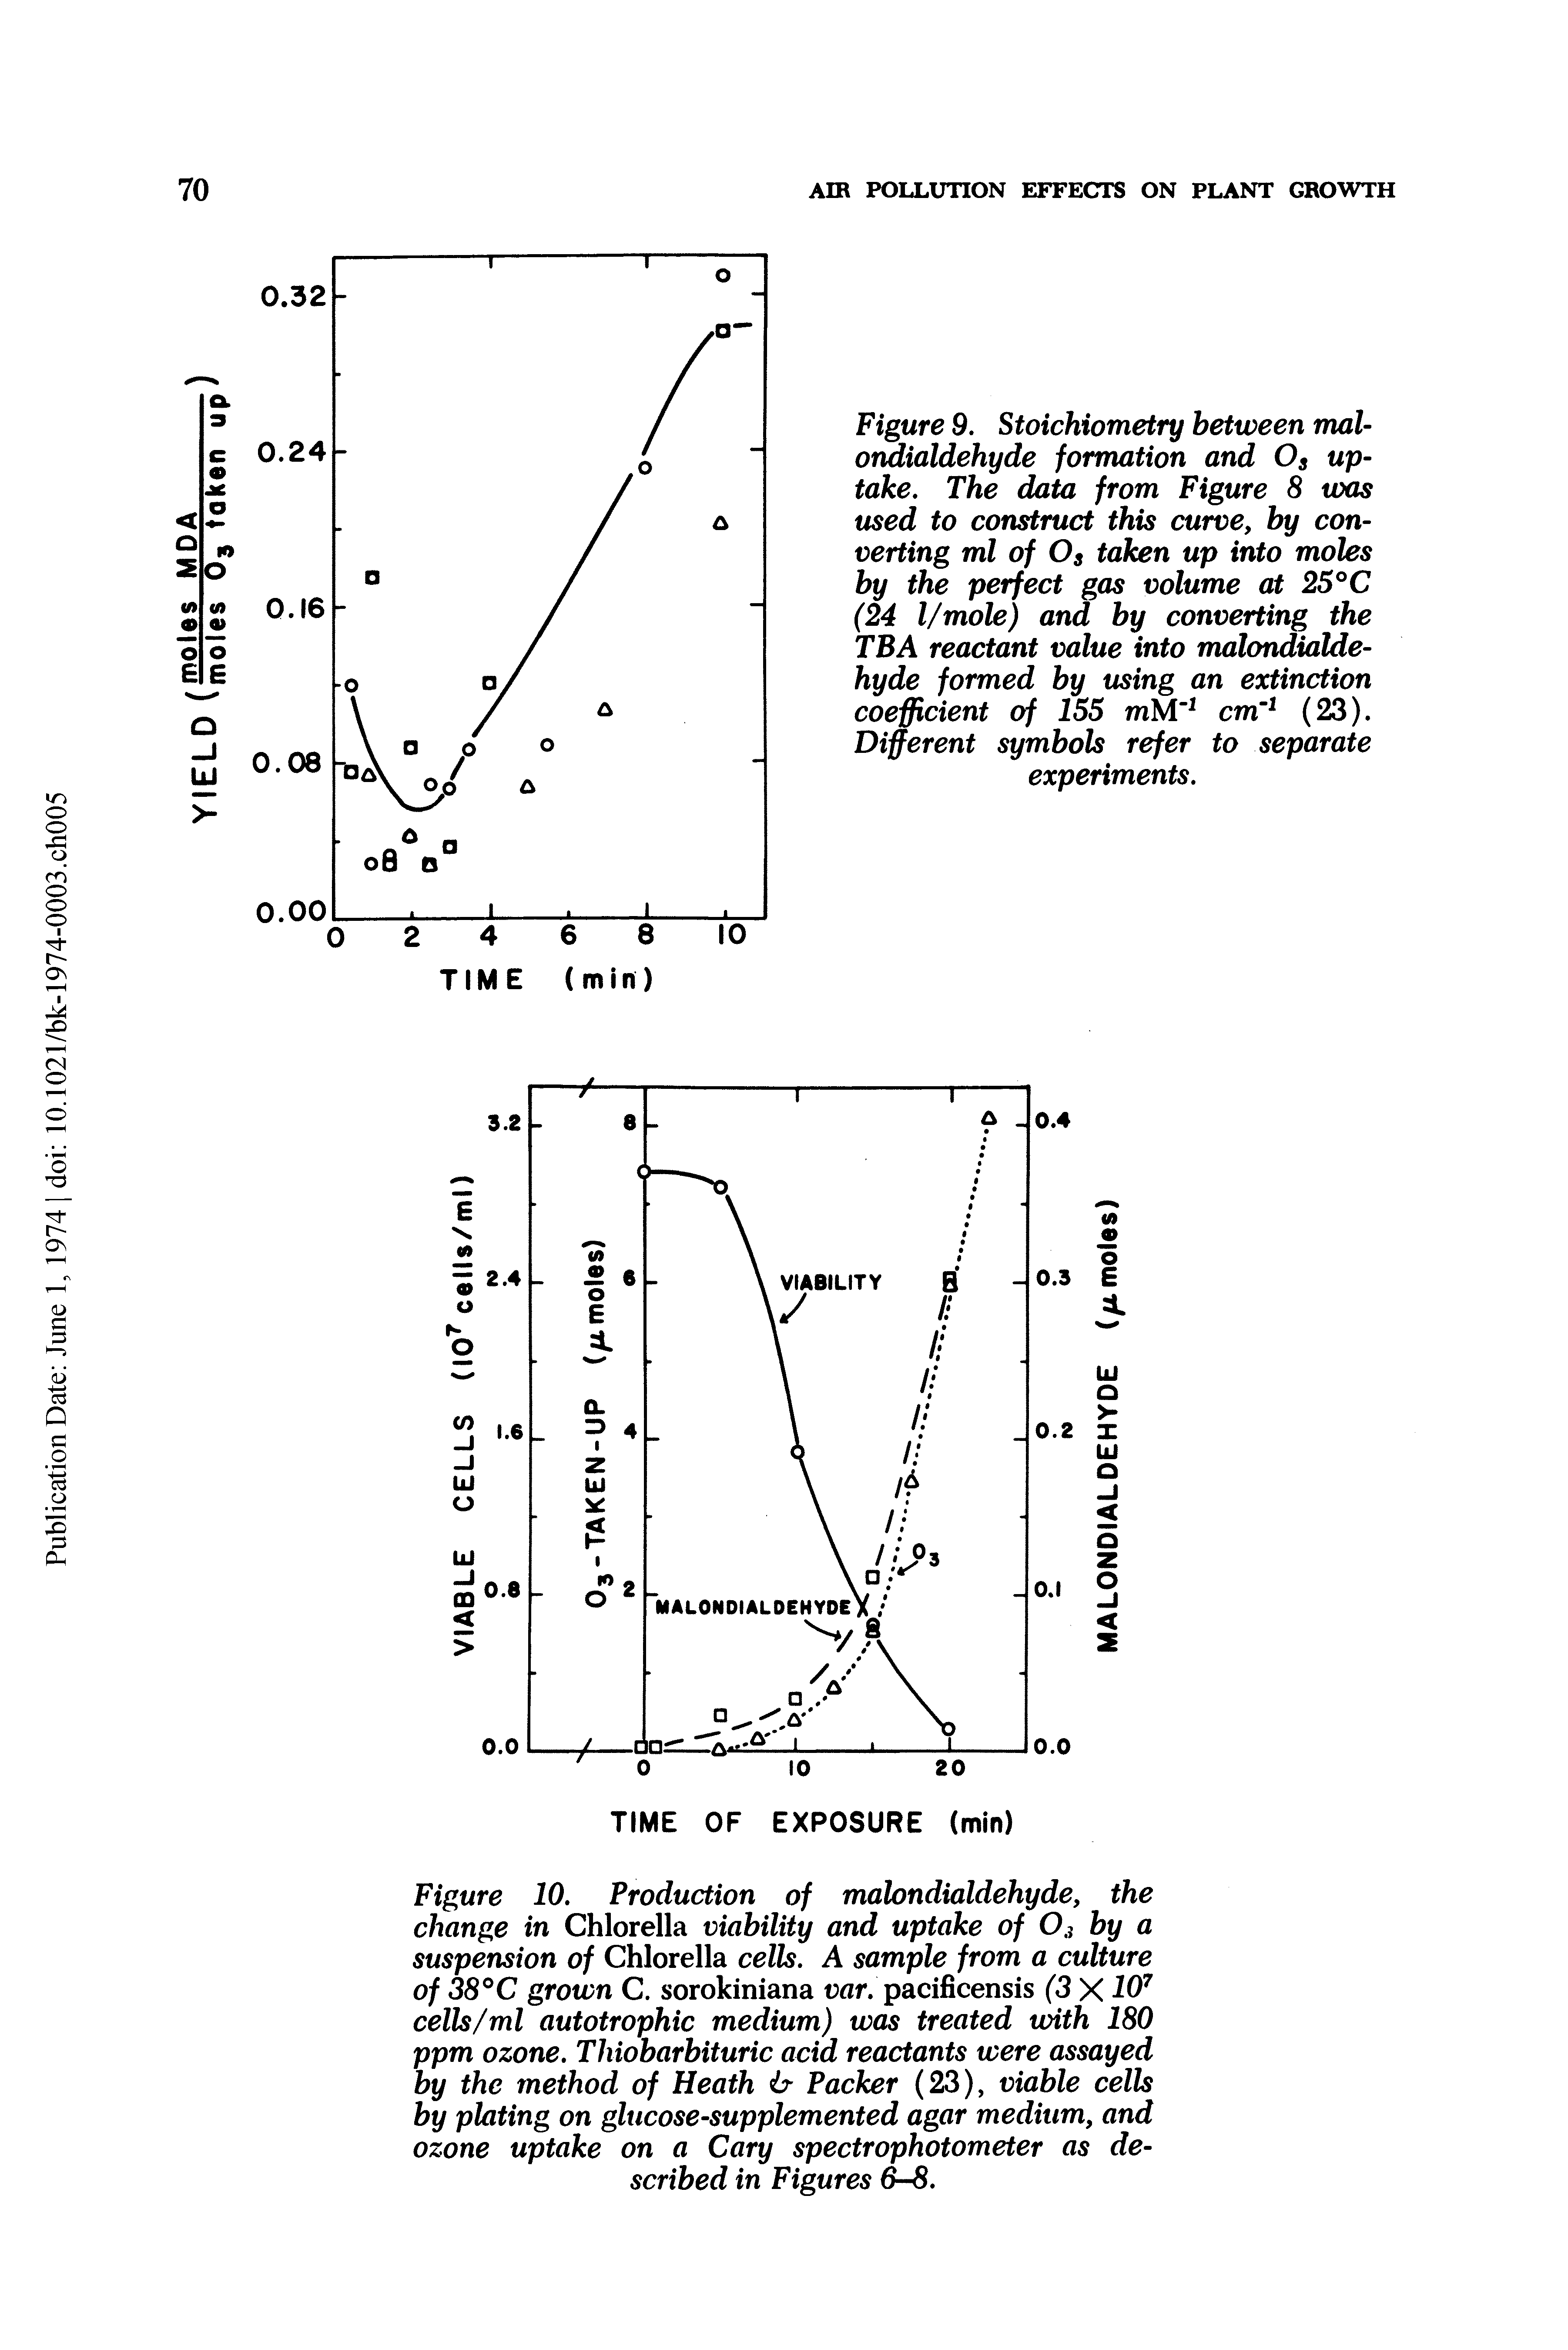 Figure 10. Production of malondialdehyde, the change in Chlorella viability and uptake of O3 by a suspension of Chlorella cells. A sample from a culture of 38°C grown C. sorokiniana uflr. pacificensis (3 X10 cells/ml autotrophic medium) was treated with 180 ppm ozone. Thiobarbituric acid reactants were assayed by the method of Heath b- Packer (23), viable cells by plating on glucose-supplemented agar medium, and ozone uptake on a Cary spectrophotometer as described in Figures 6-8.